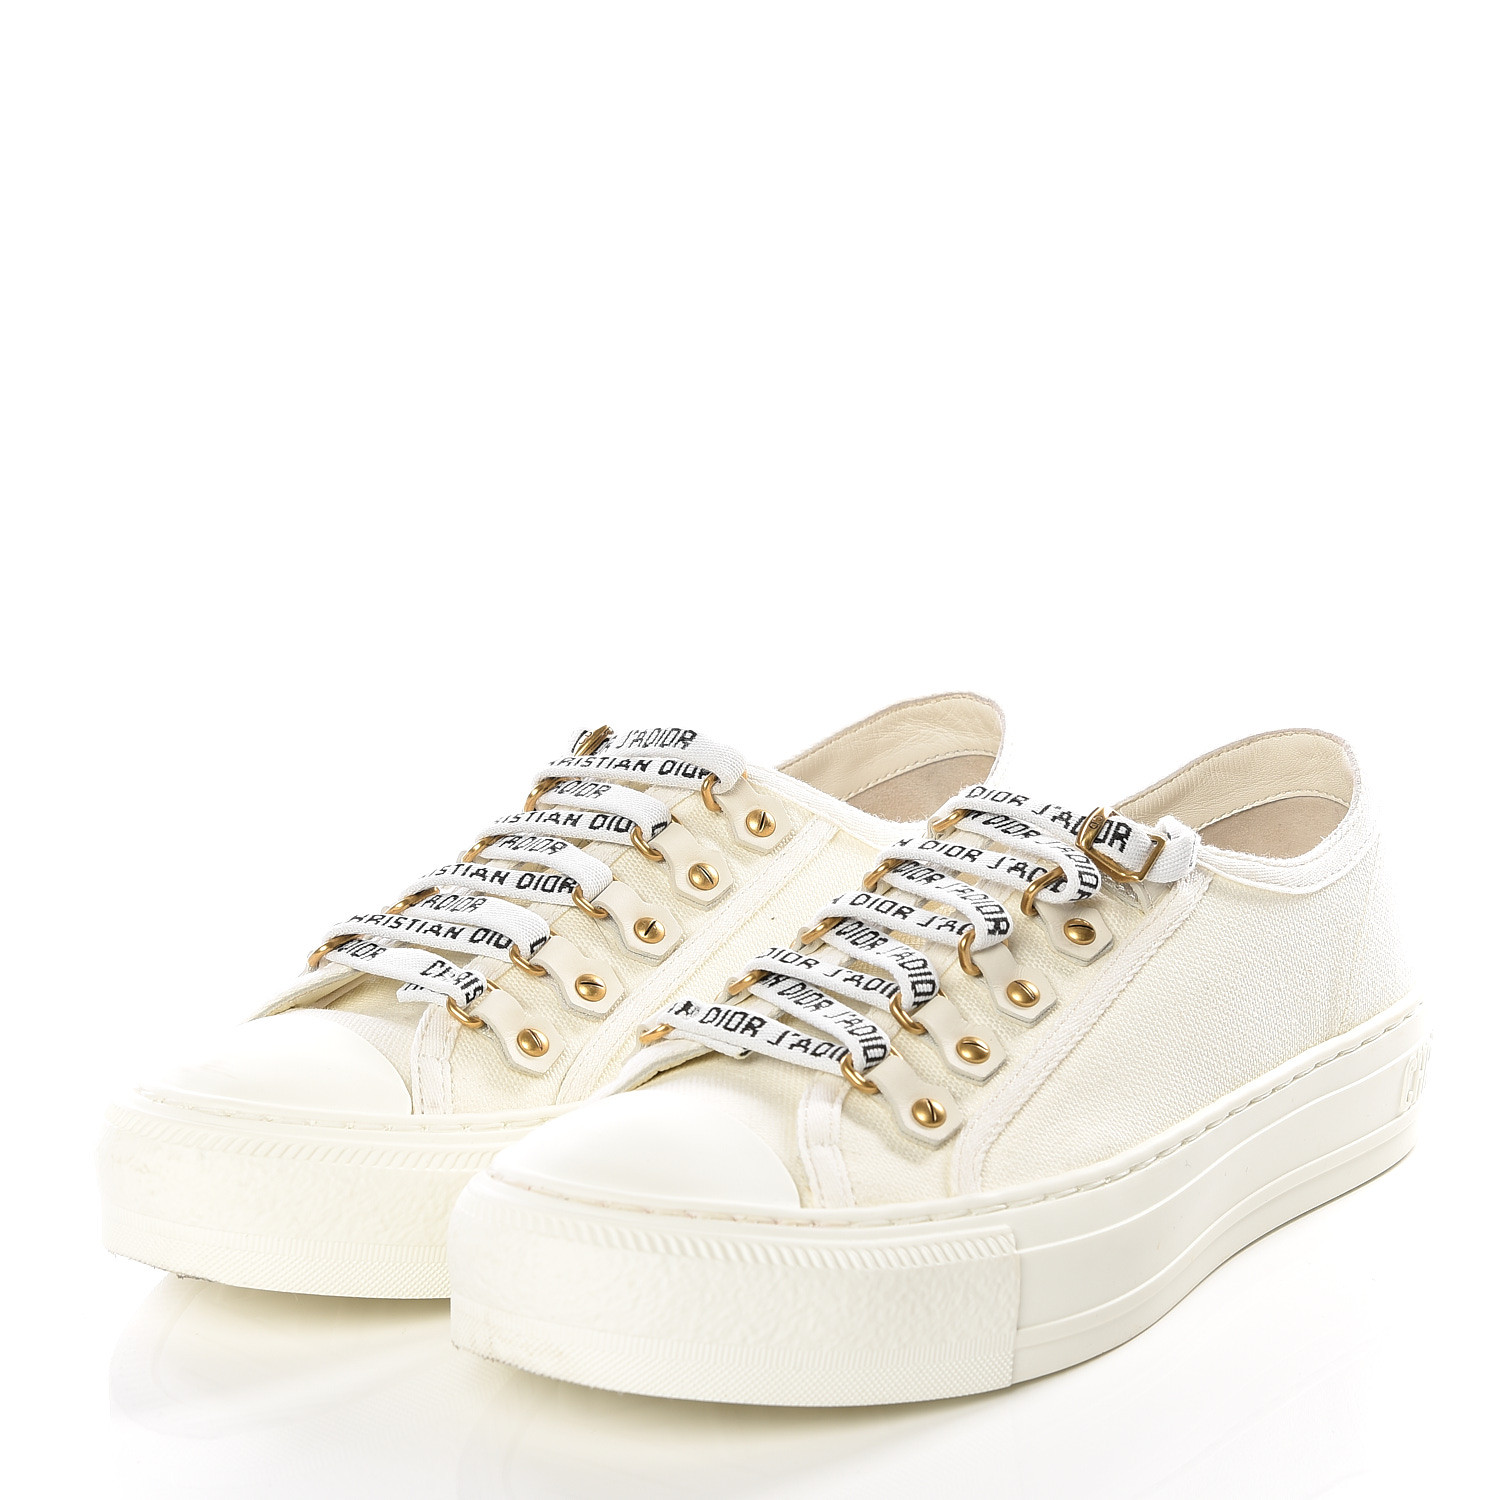 CHRISTIAN DIOR Canvas Walk'n Dior Low Top Sneakers 36 White 545229 ...